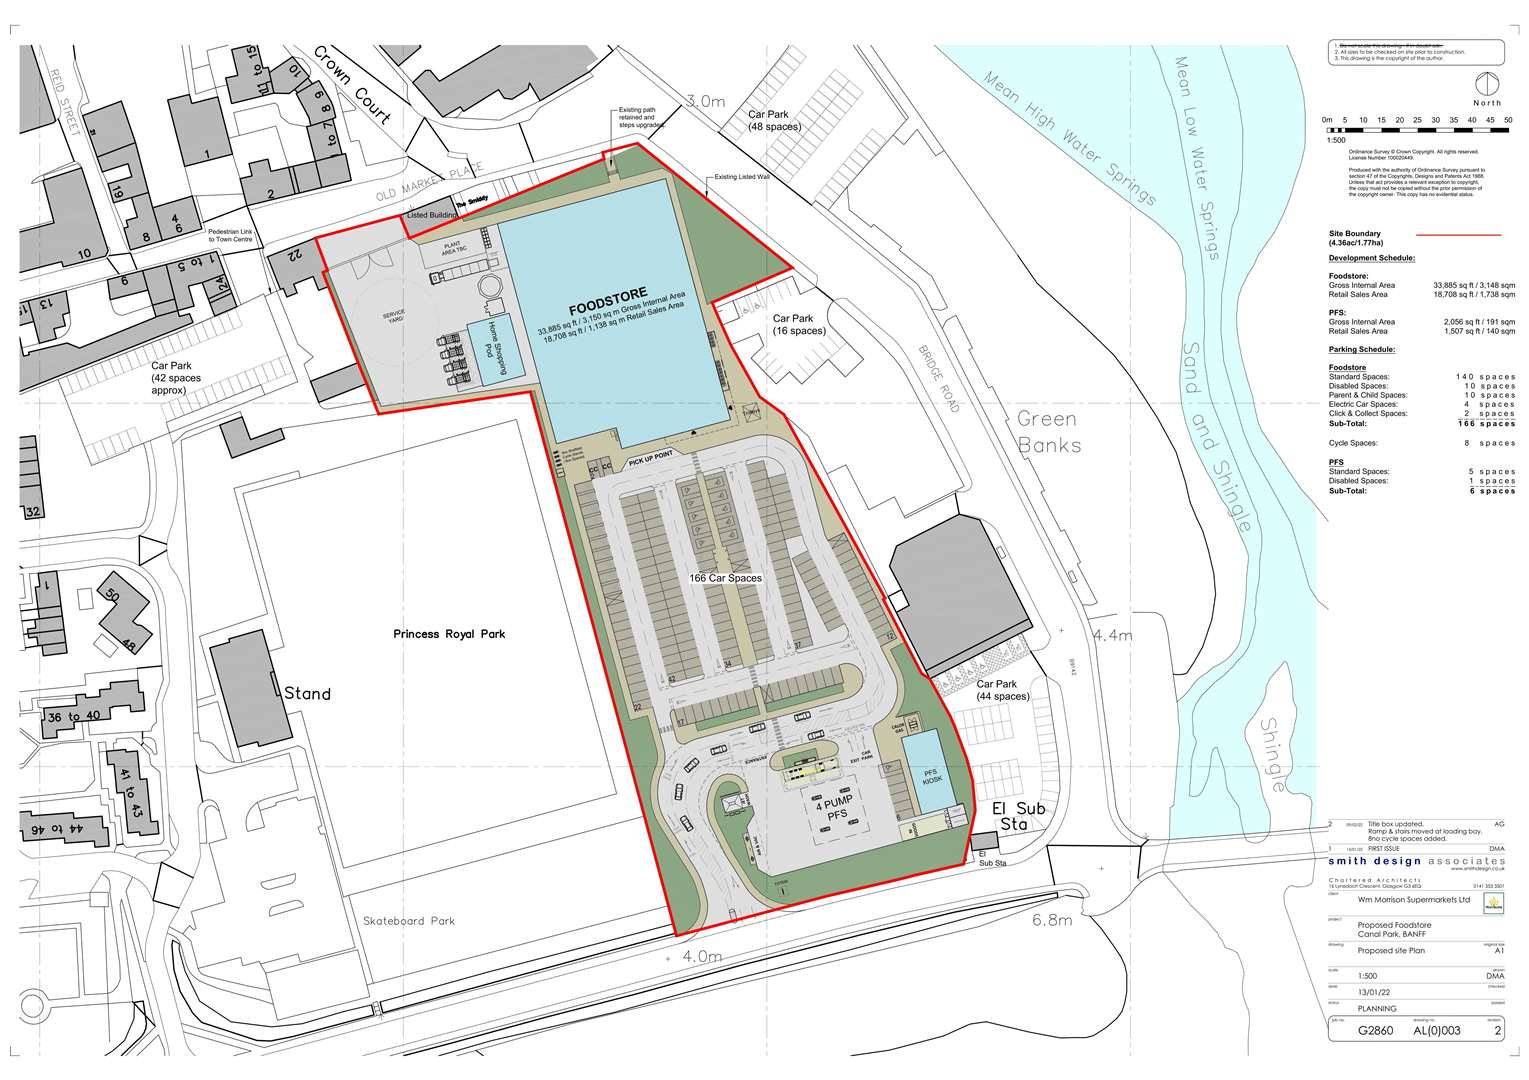 The site plan for Morrisons in Banff.